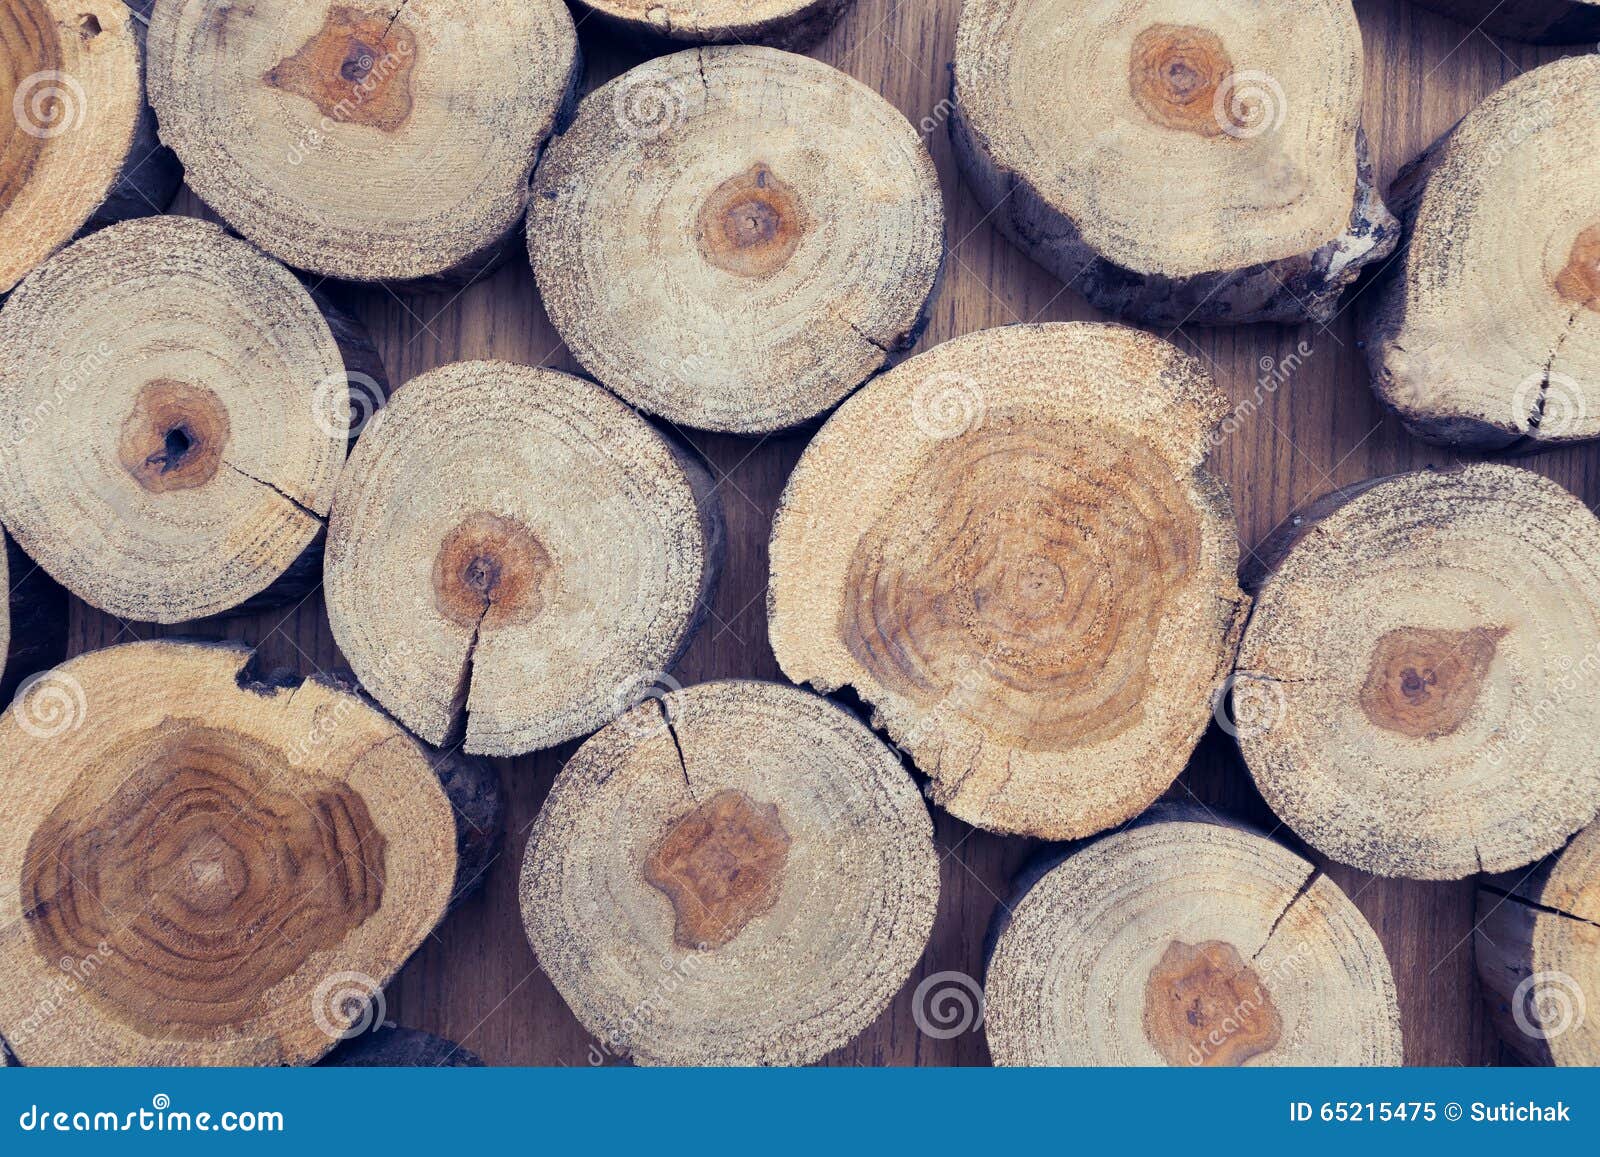 Small piece of wood logs used for design decorated interior, wood texture background